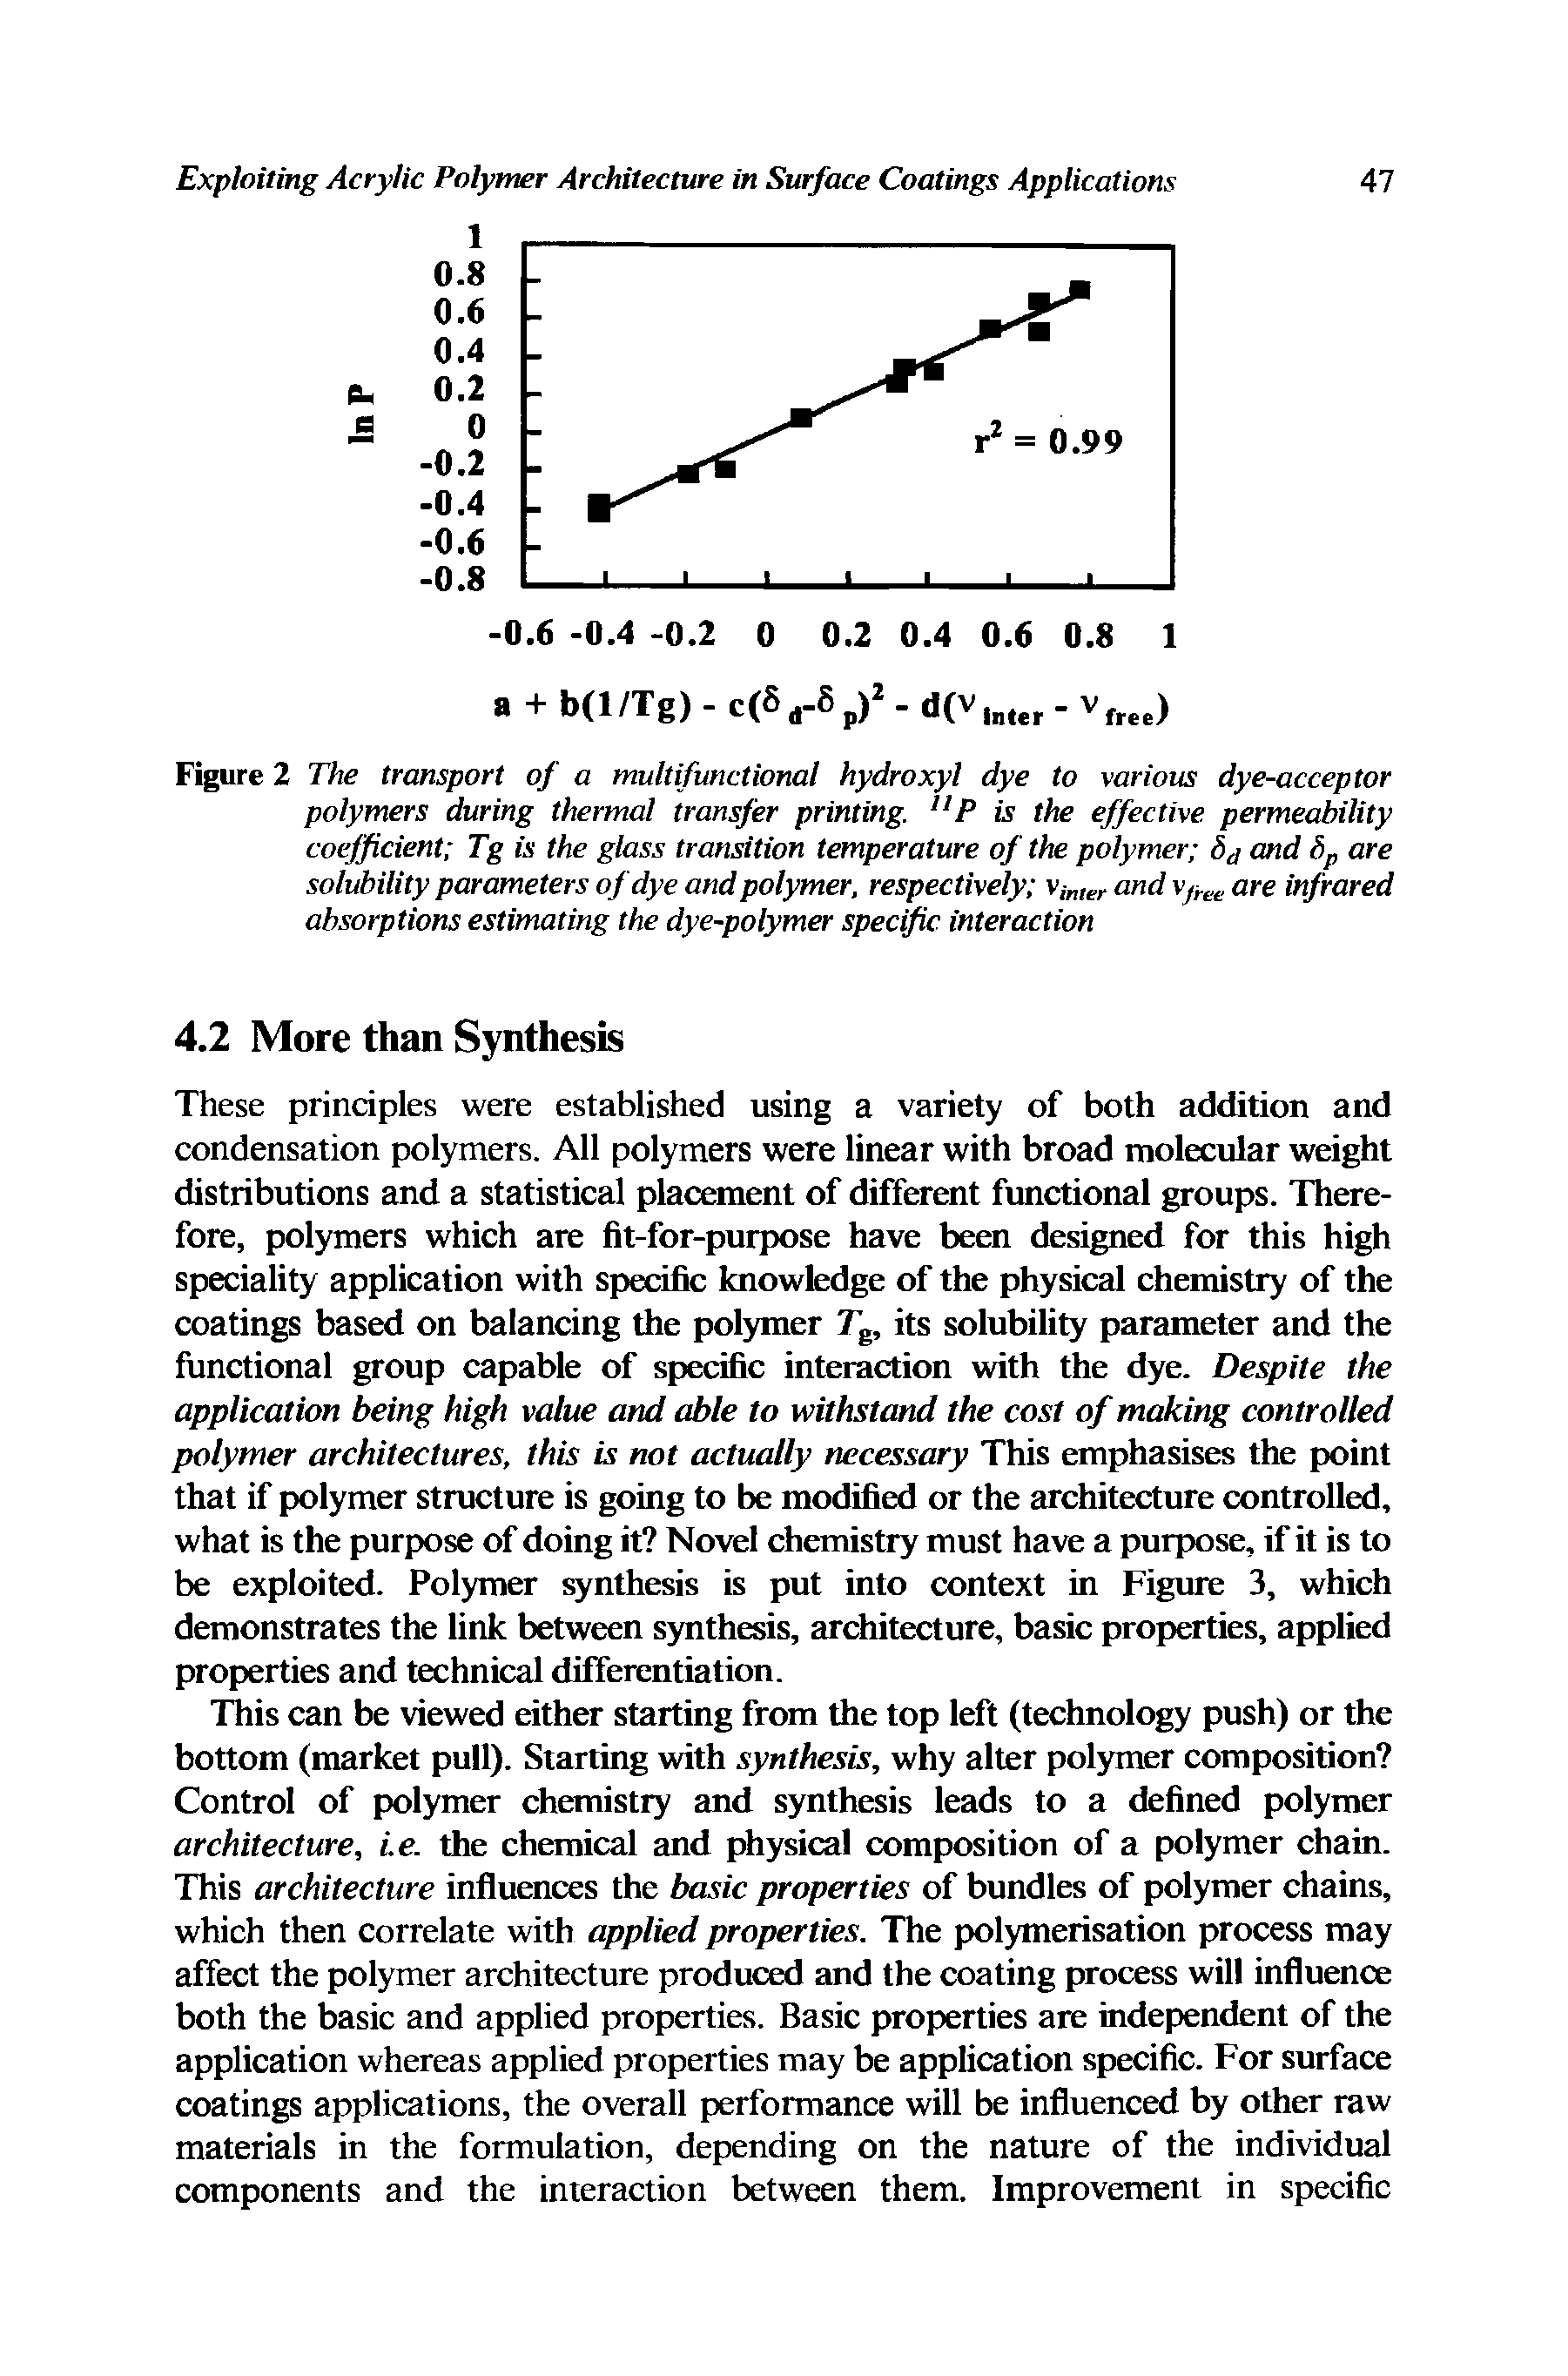 Figure 2 The transport of a multifunctional hydroxyl dye to various dye-acceptor polymers during thermal transfer printing. P is the effective permeability coejficient Tg is the glass transition temperature of the polymer and bp are solubility parameters of dye and polymer, respectively Vj ,cr and are infrared absorptions estimating the dye-polymer specific interaction...